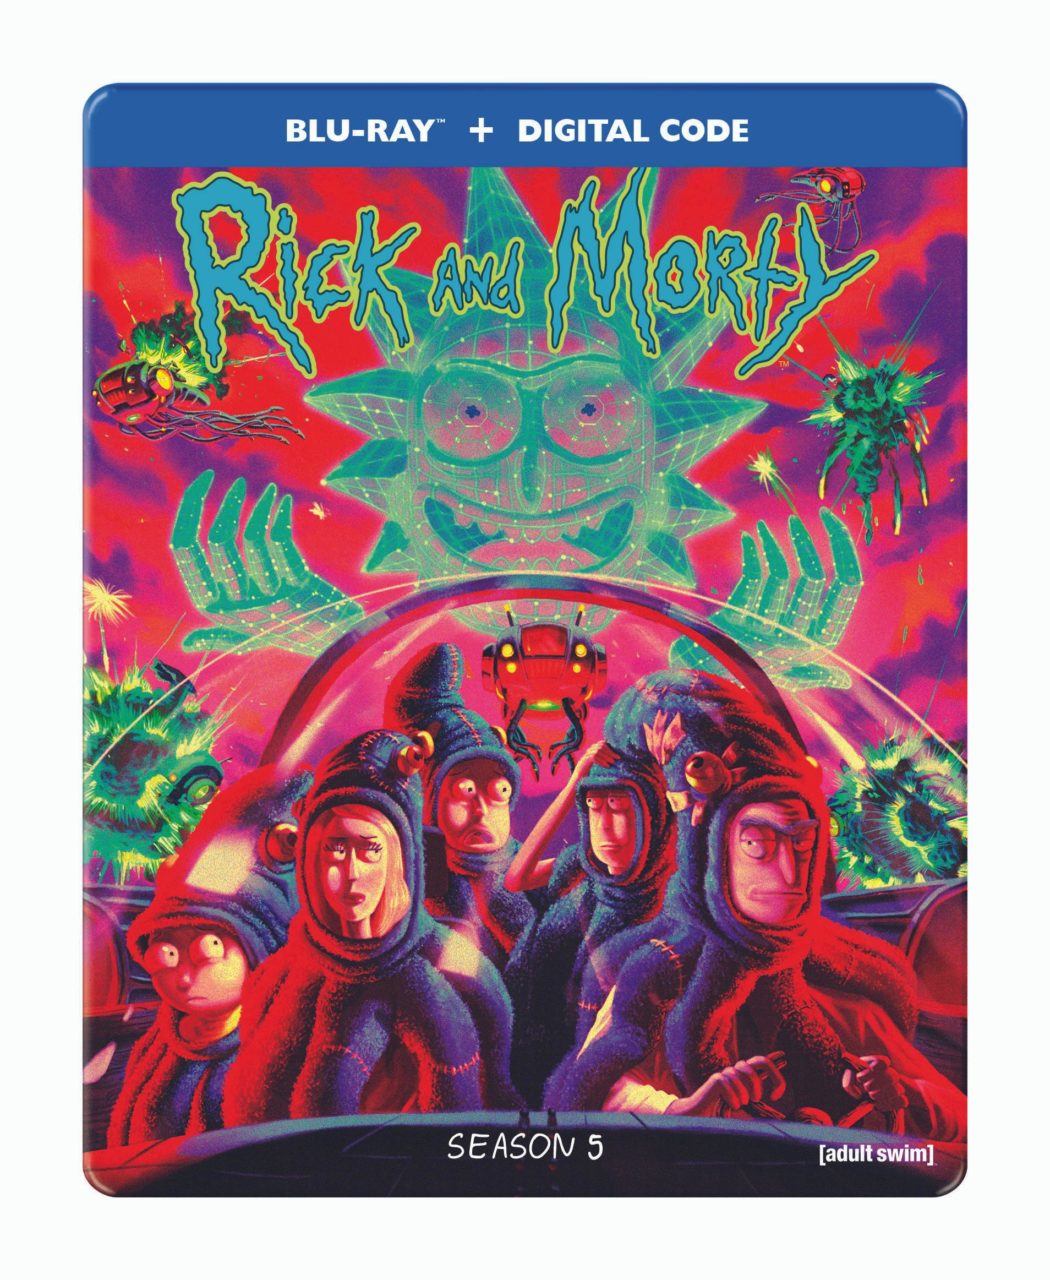 Rick And Morty: The Complete Fifth Season Blu-Ray Steelbook Combo Pack cover (Warner Bros. Home Entertainment)